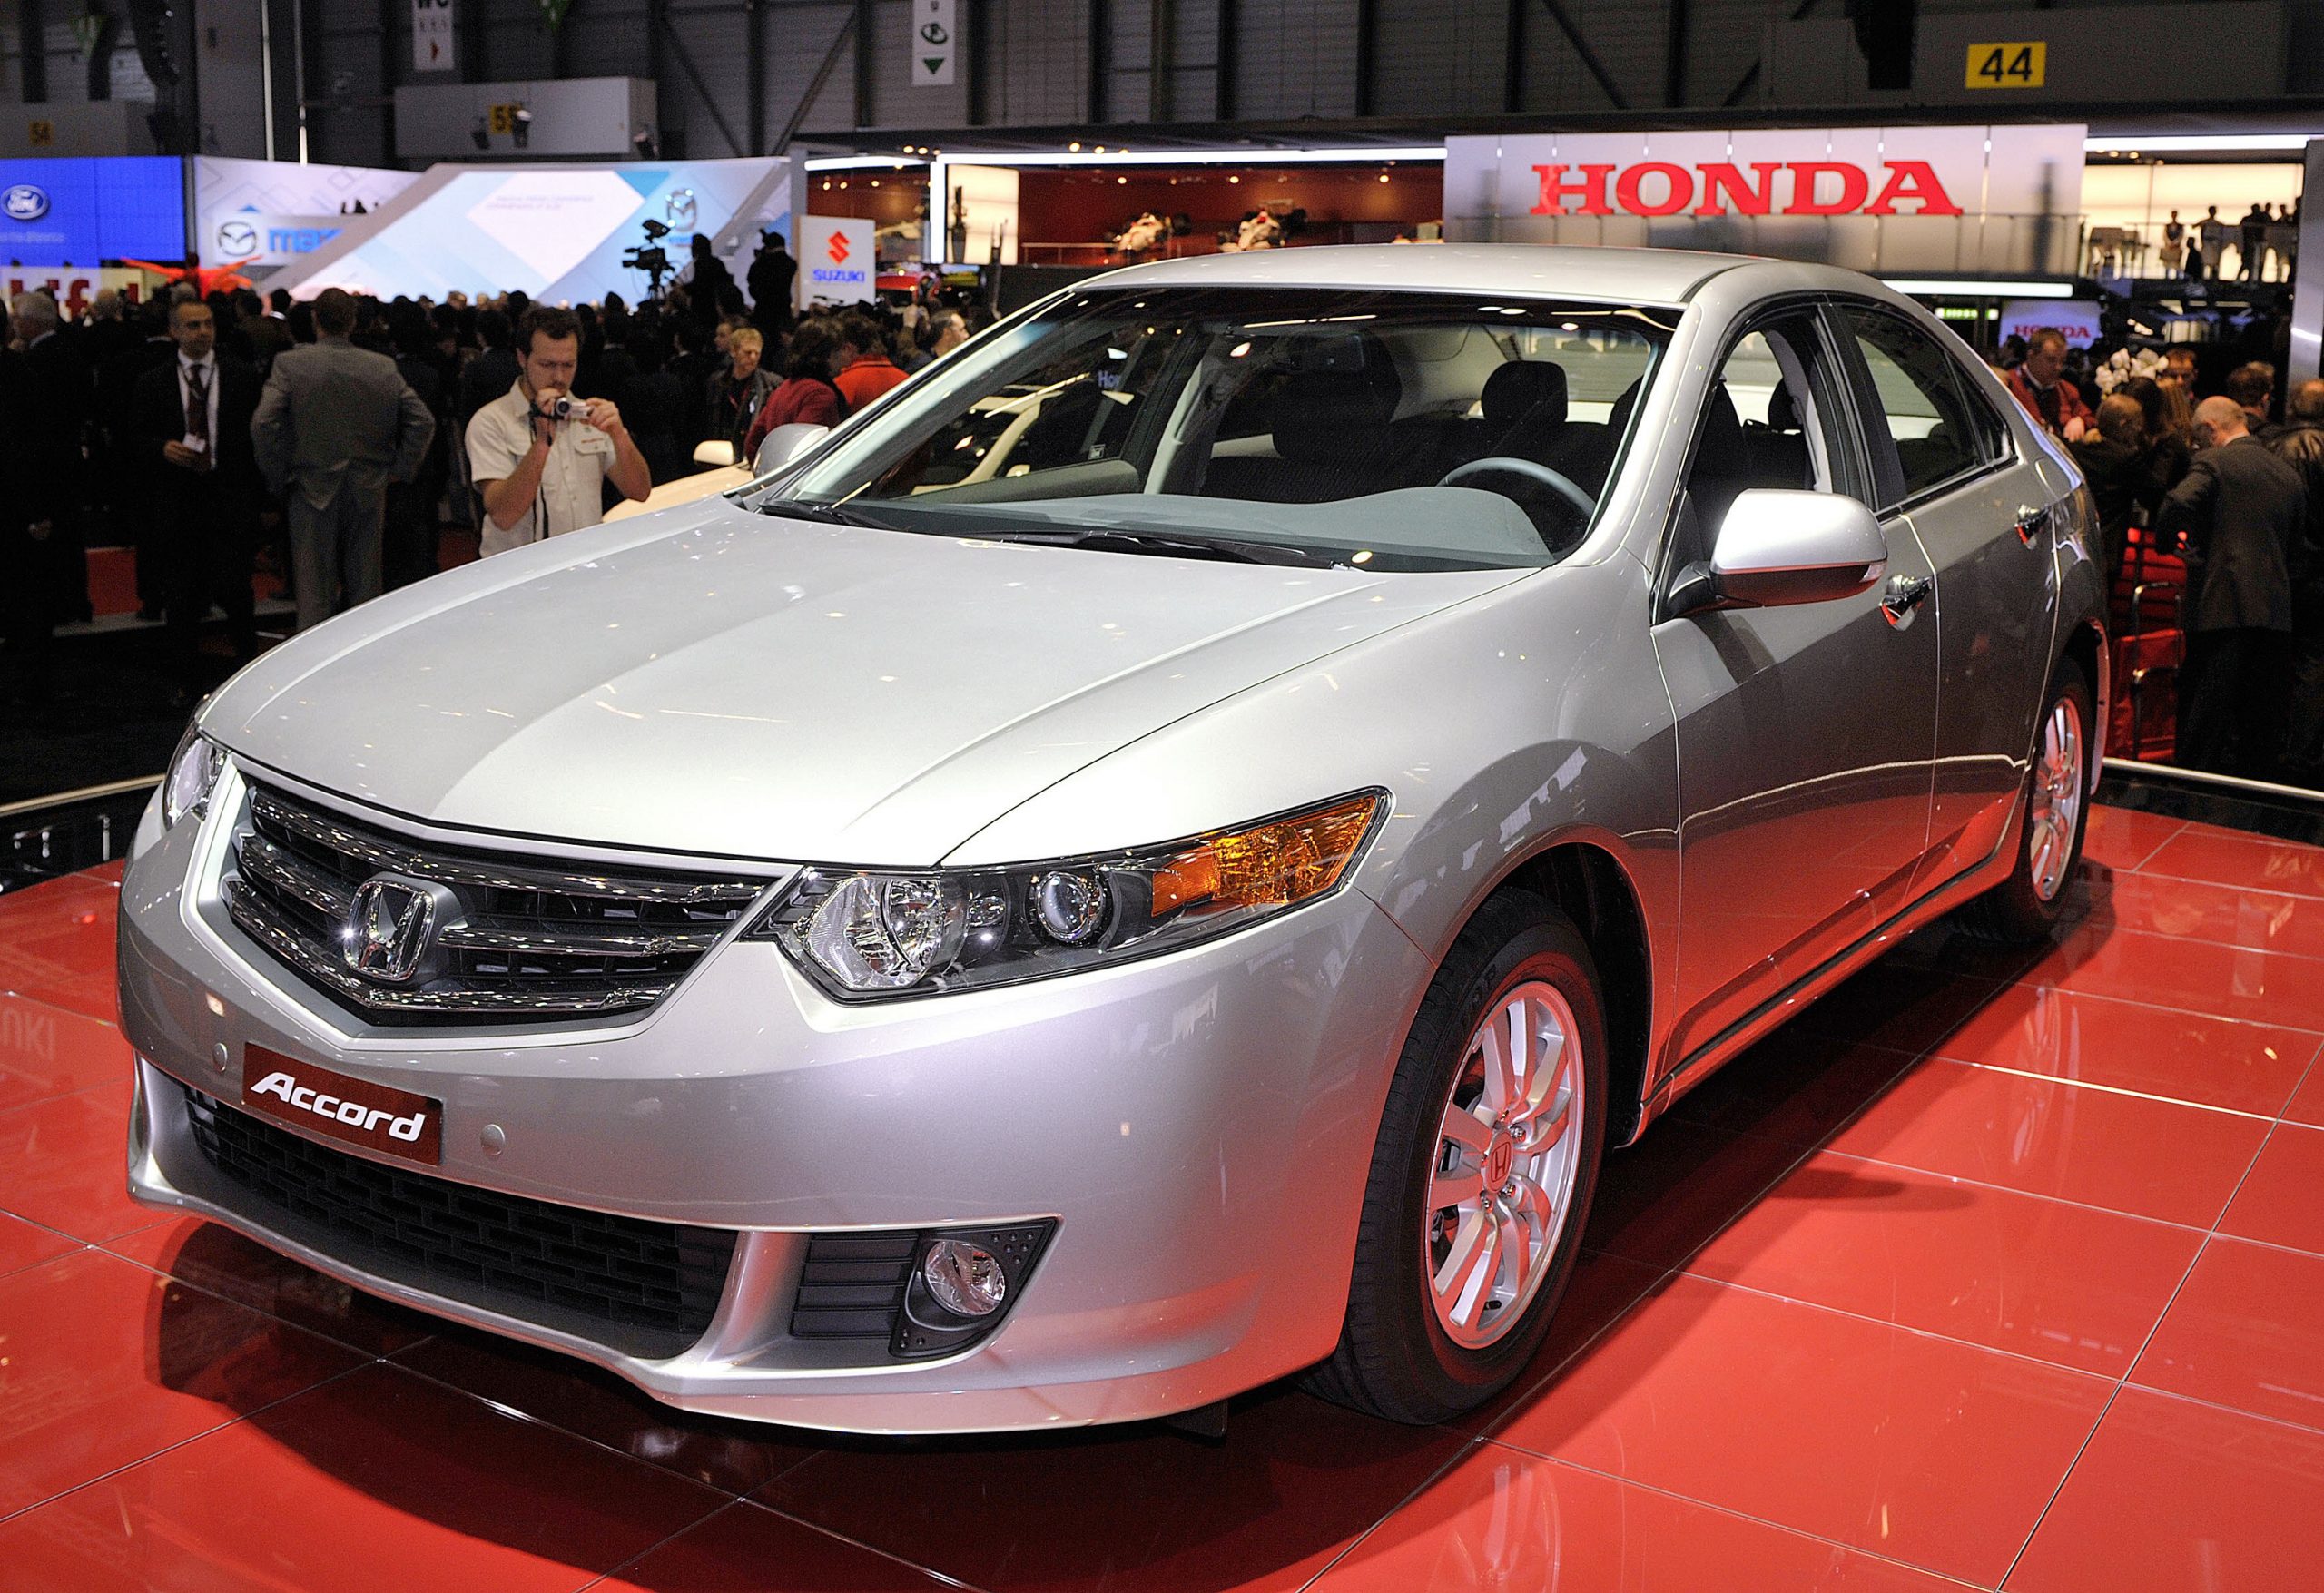 A silver Honda Accord, and excellent used family sedan, shot from the front 3/4 at an auto show